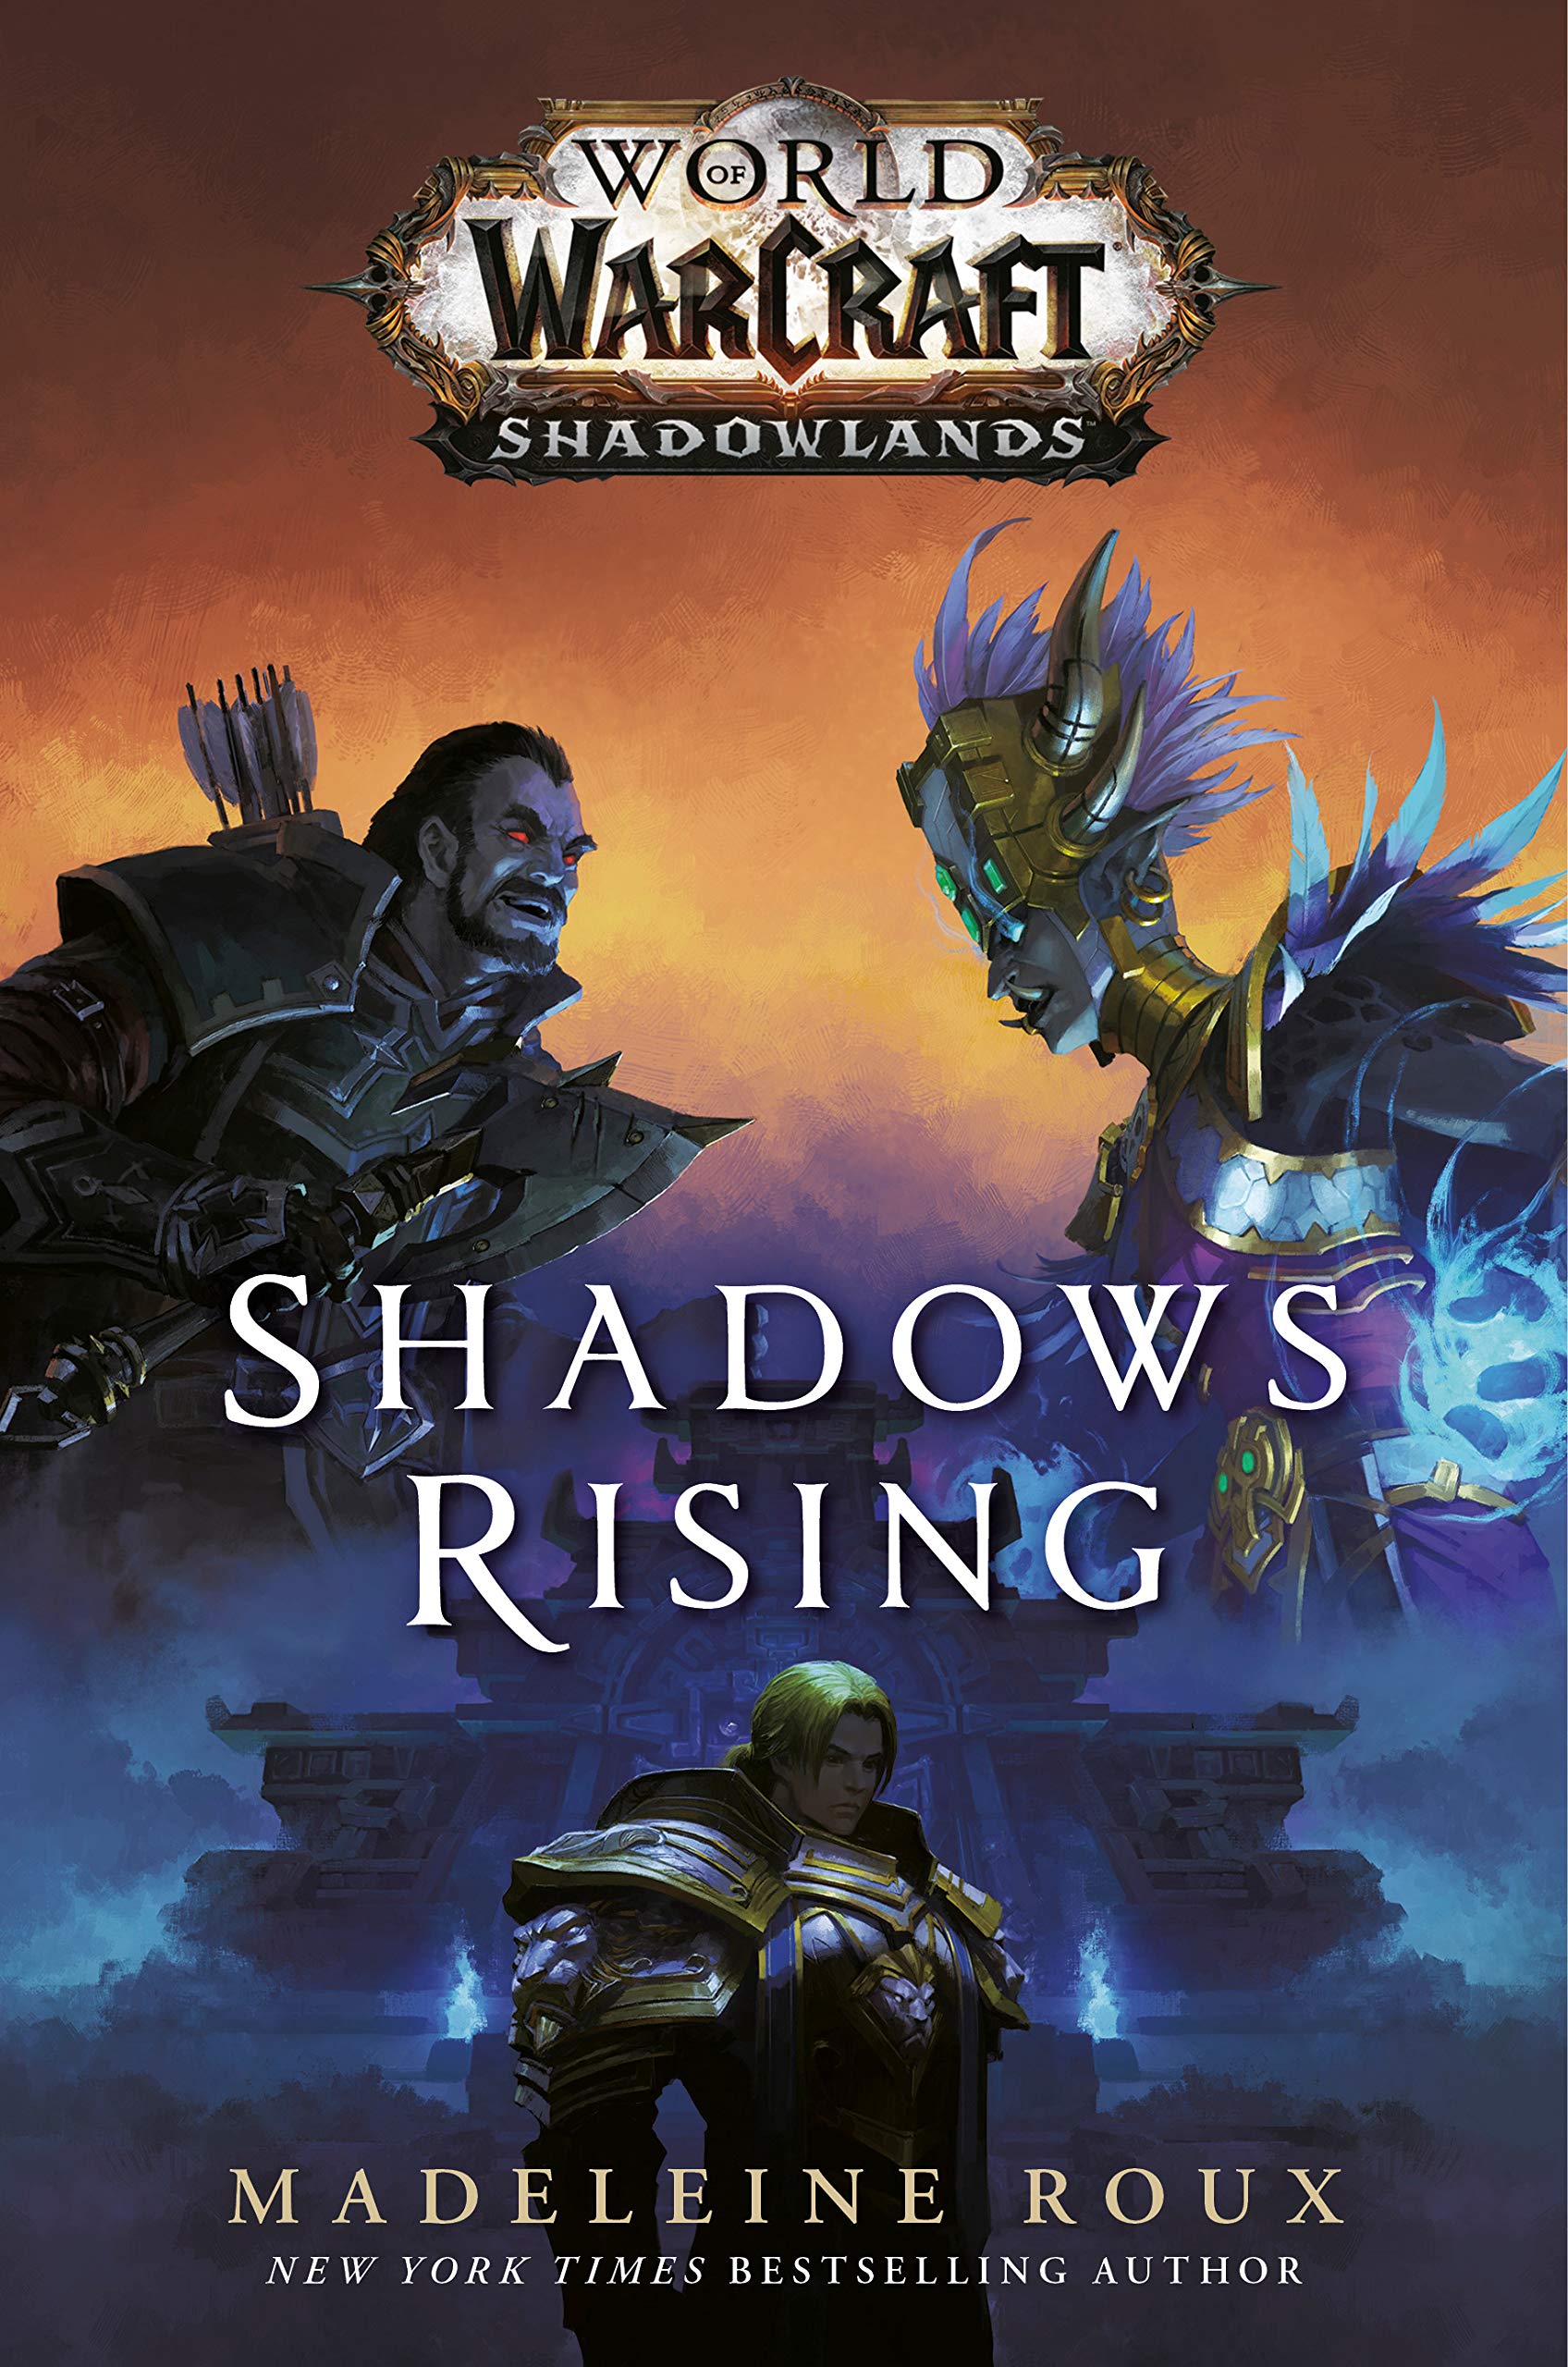 World of Warcraft: Shadows Rising cover